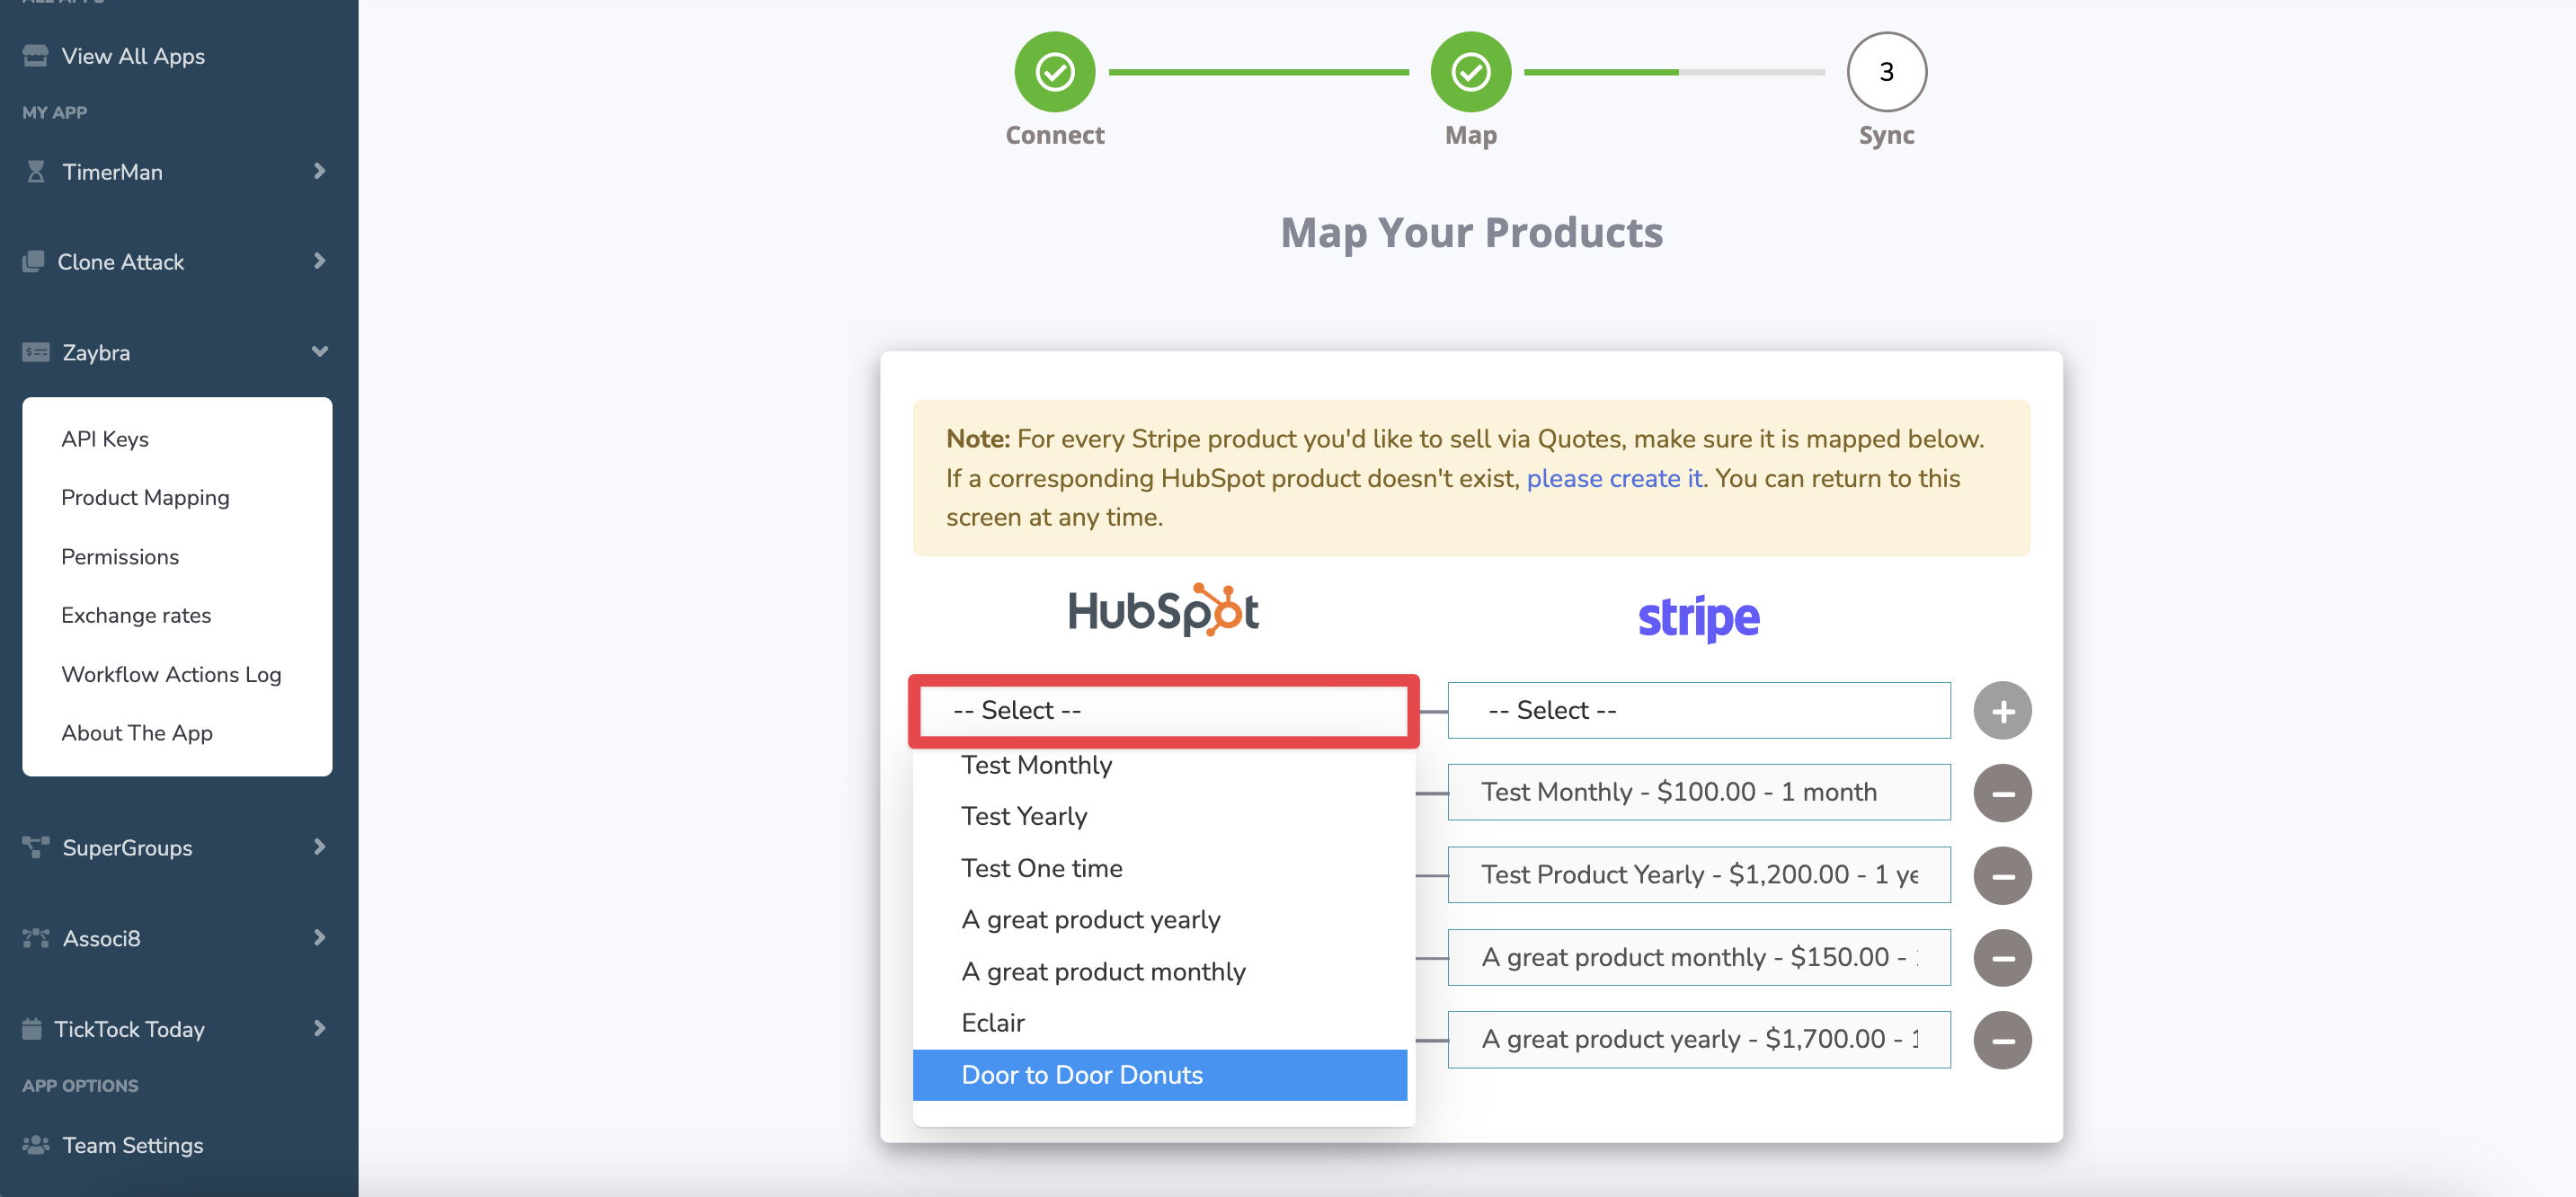 How to Map Stripe Products to HubSpot Using Zaybra